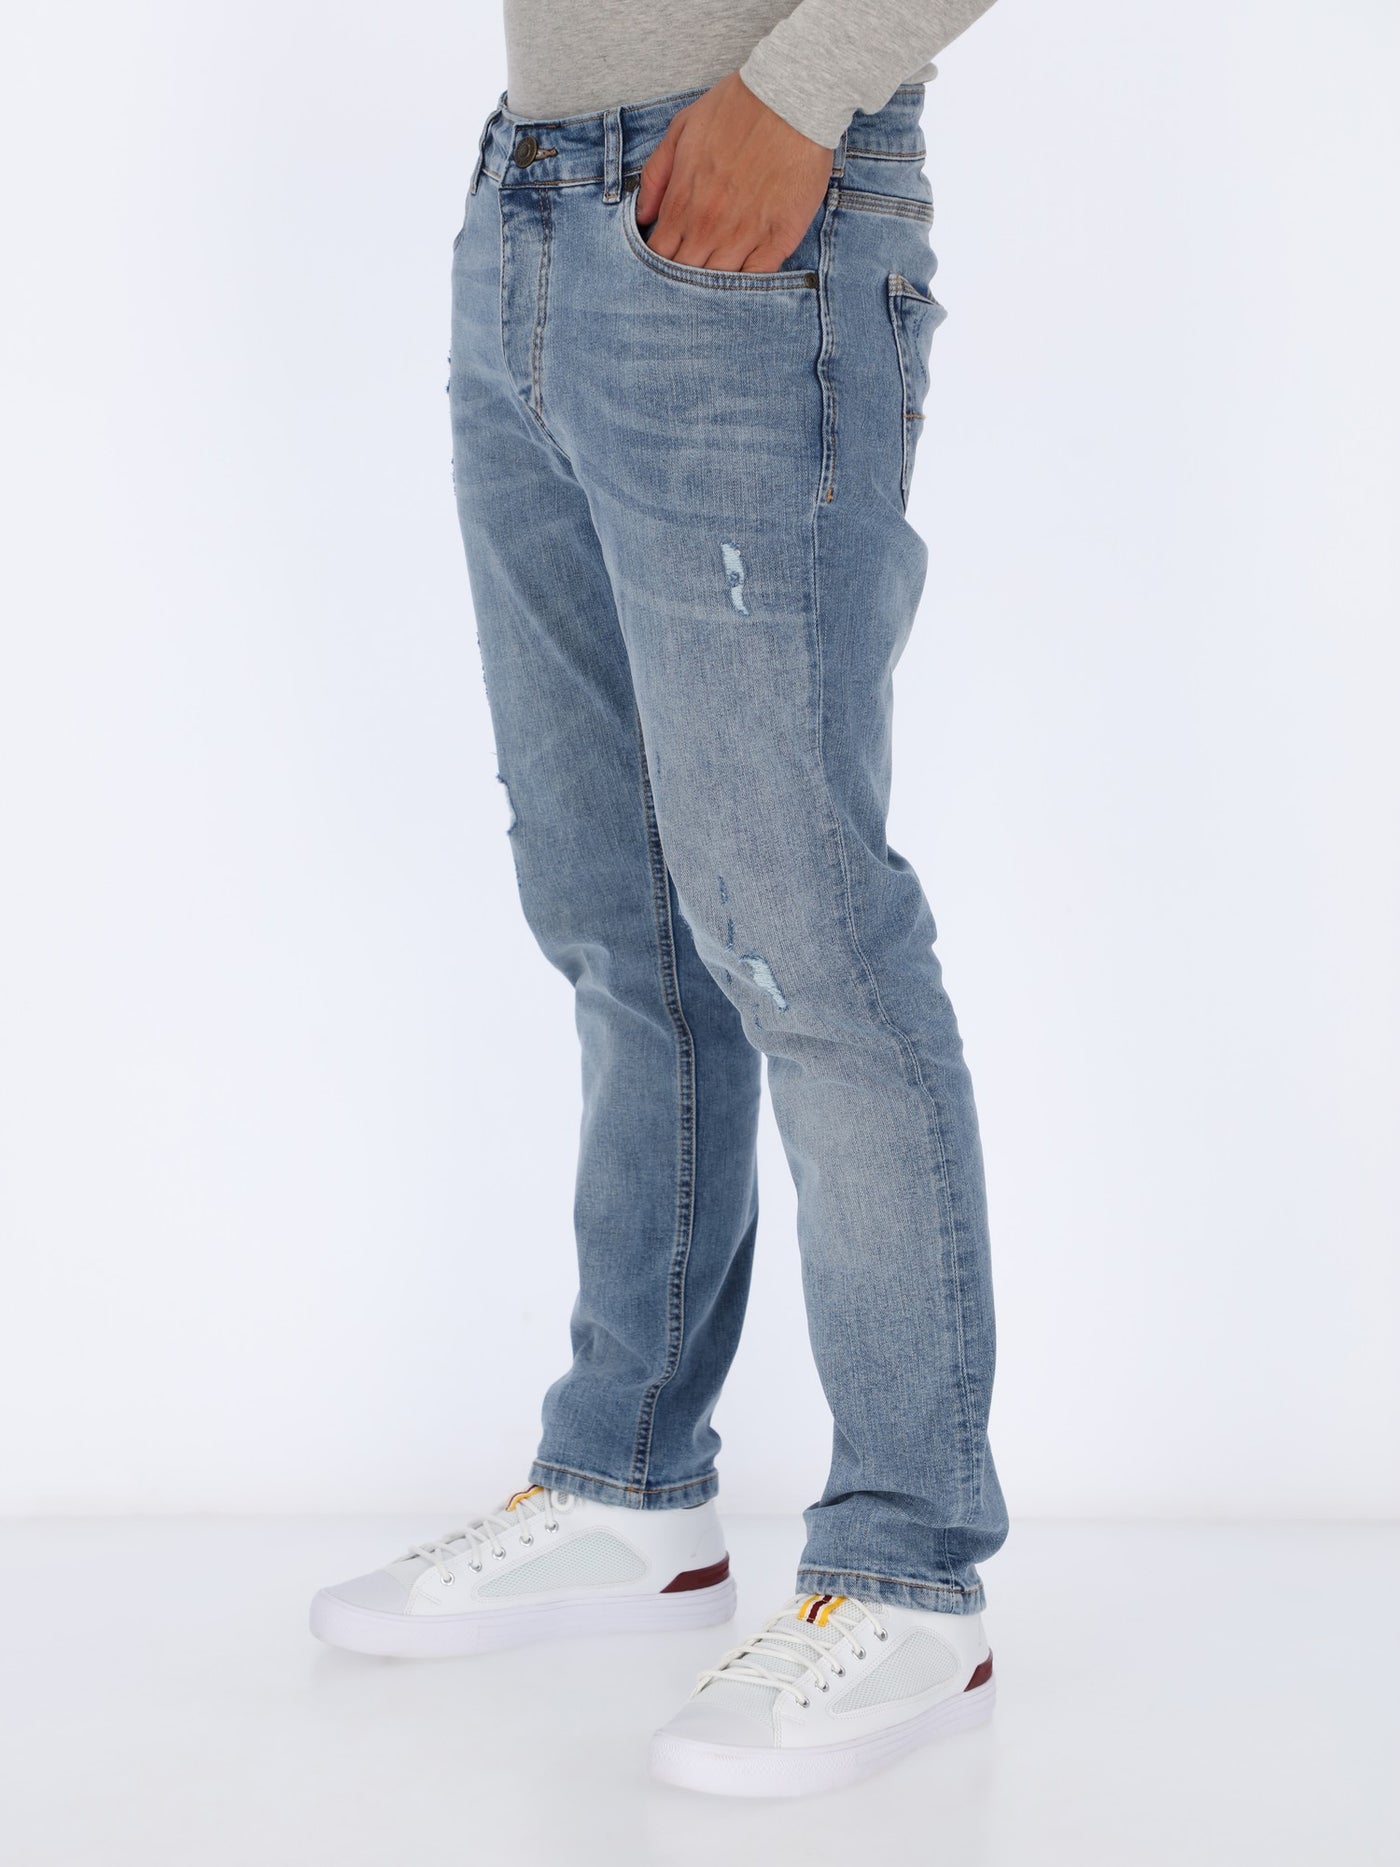 Slim Fit Jeans Pants with Rips